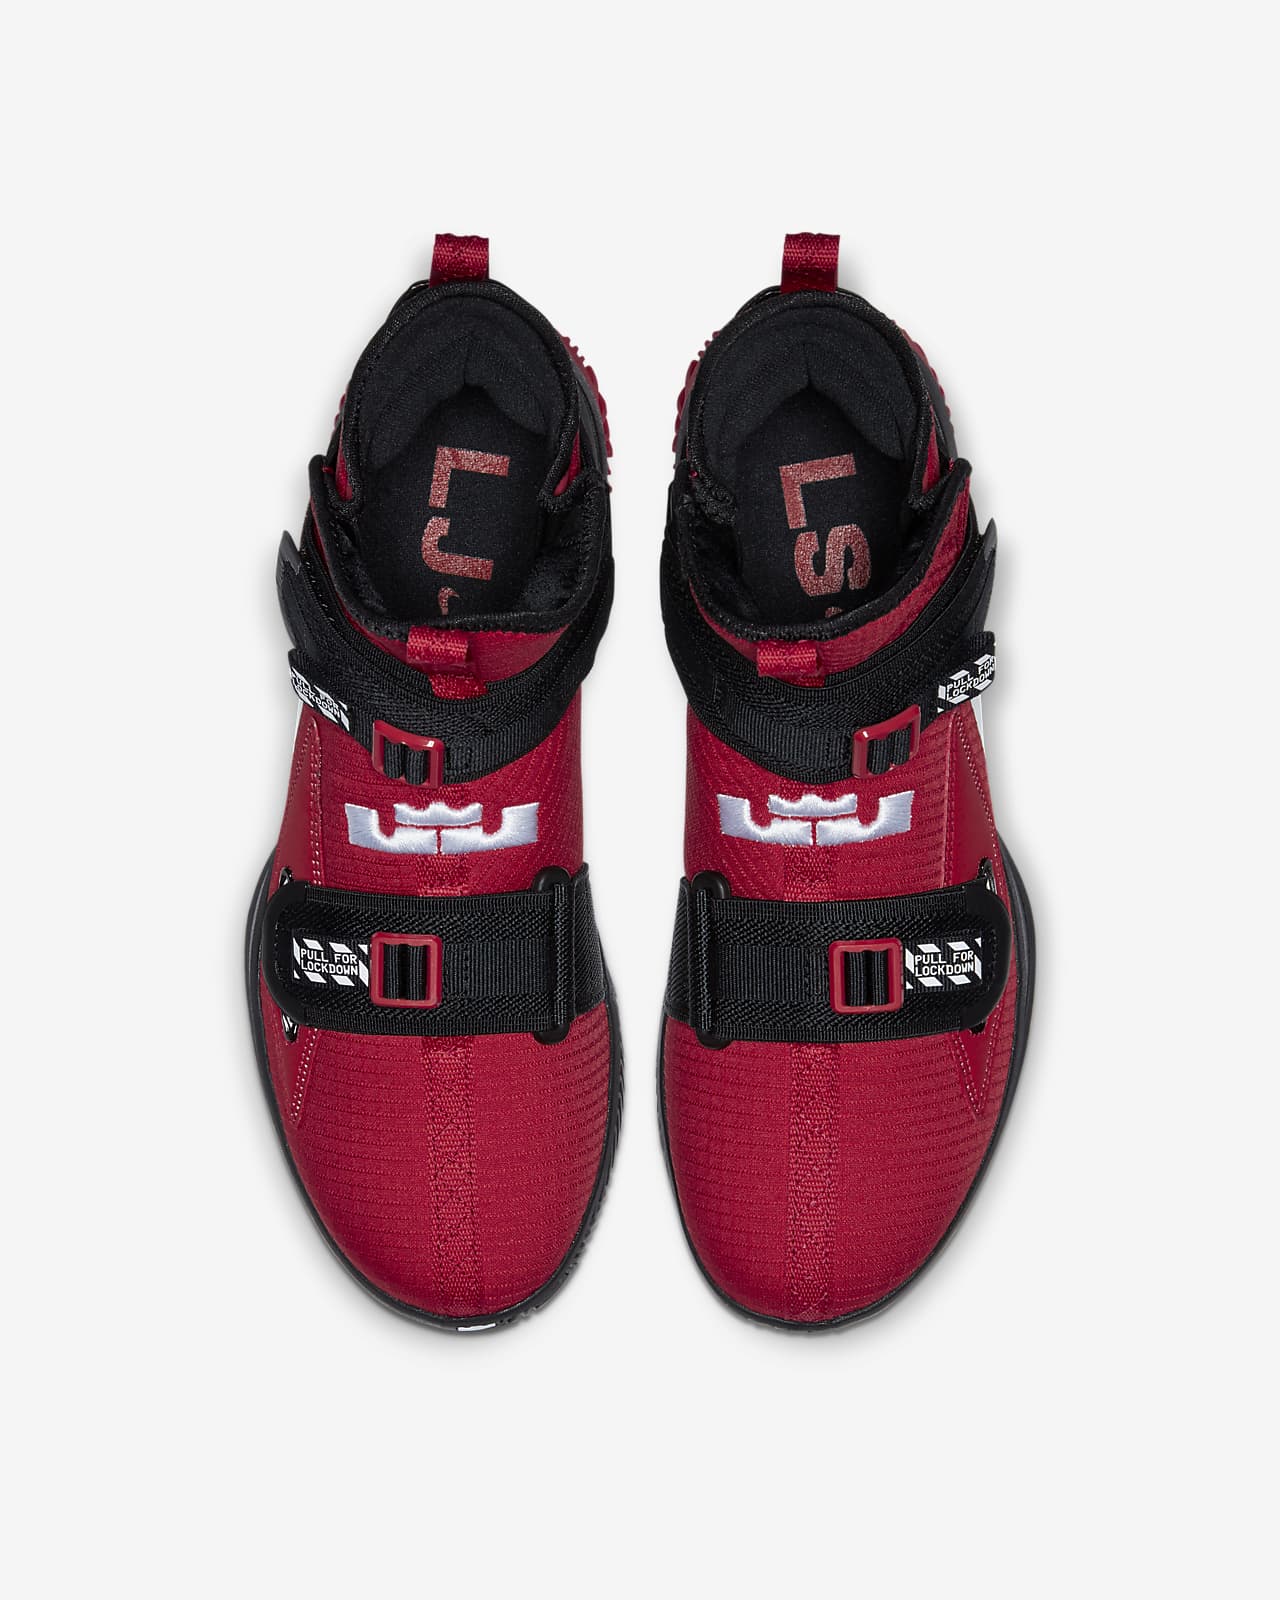 lebron soldier 13 basketball shoes